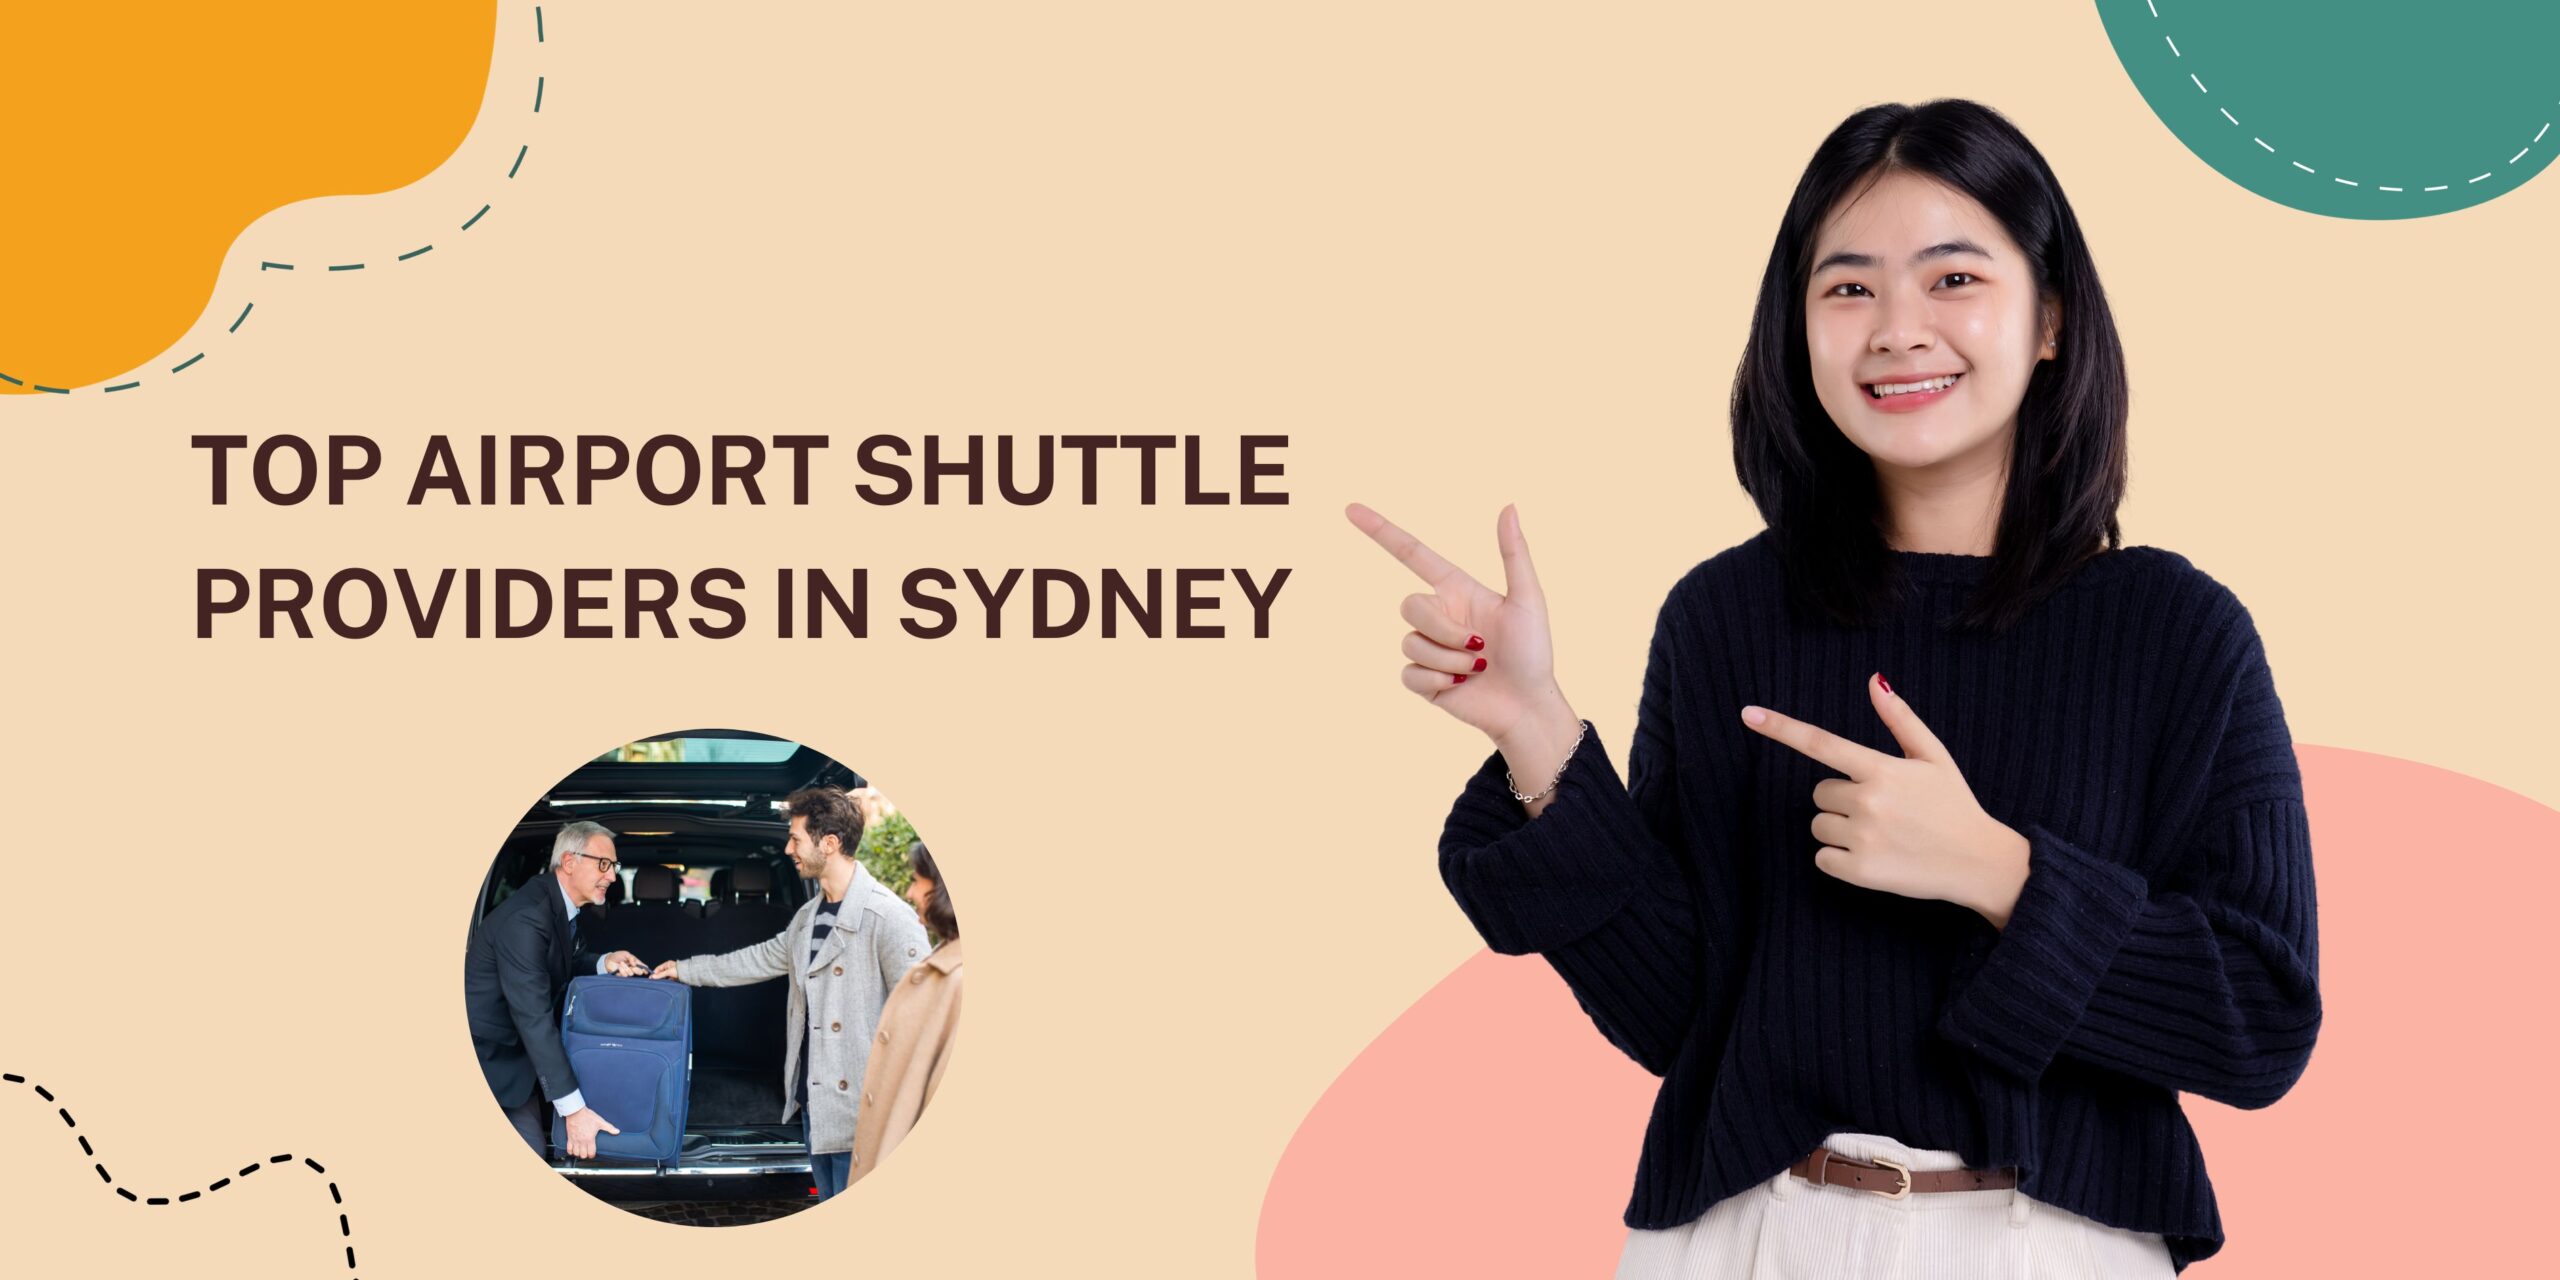 Top Airport Shuttle Providers in Sydney